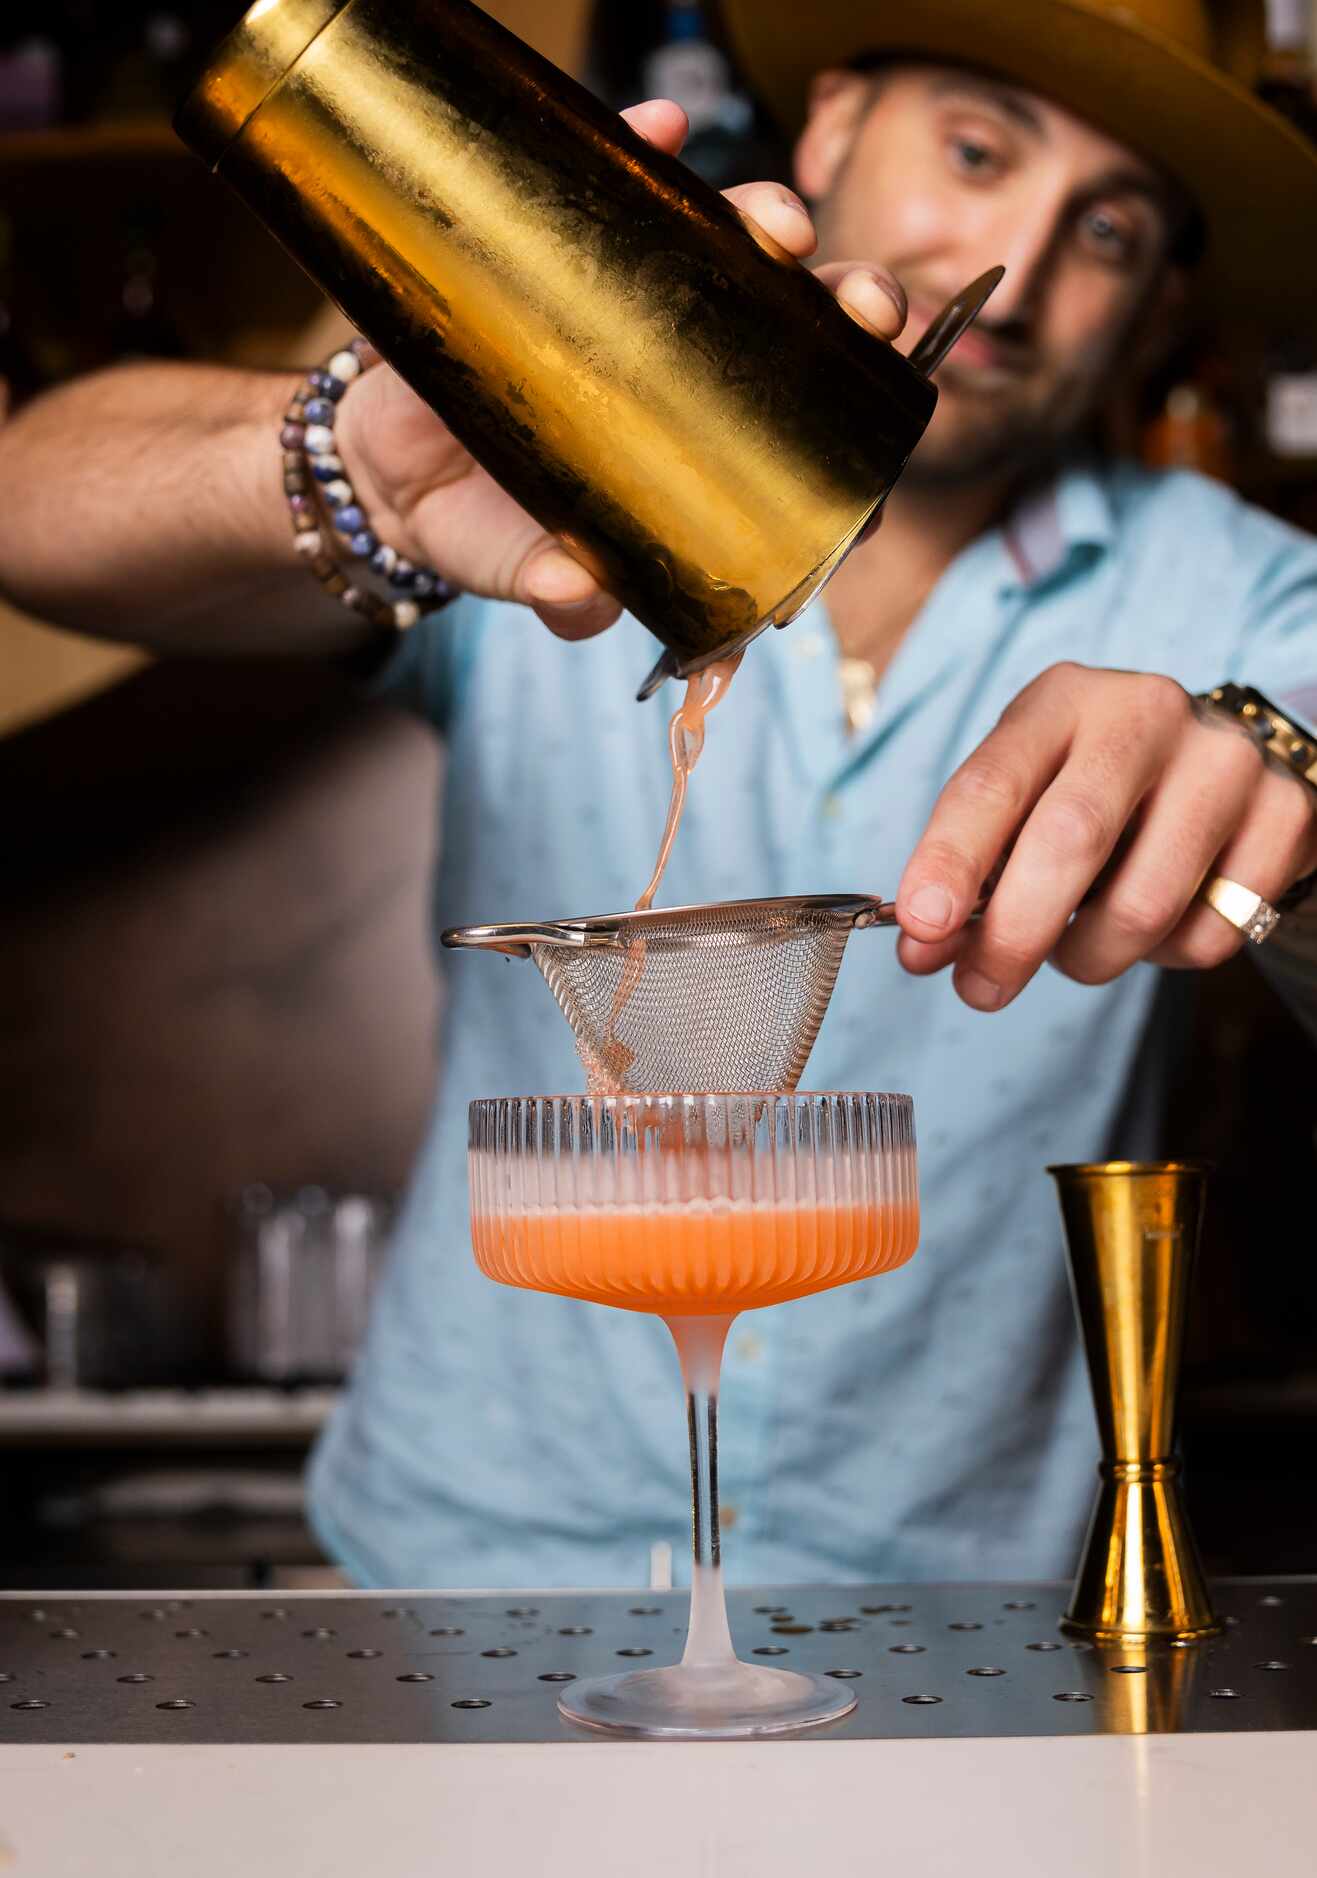 Owner Ryan Oruch prepares a Bubblz & Berriez cocktail with strawberry infused vodka, lemon,...